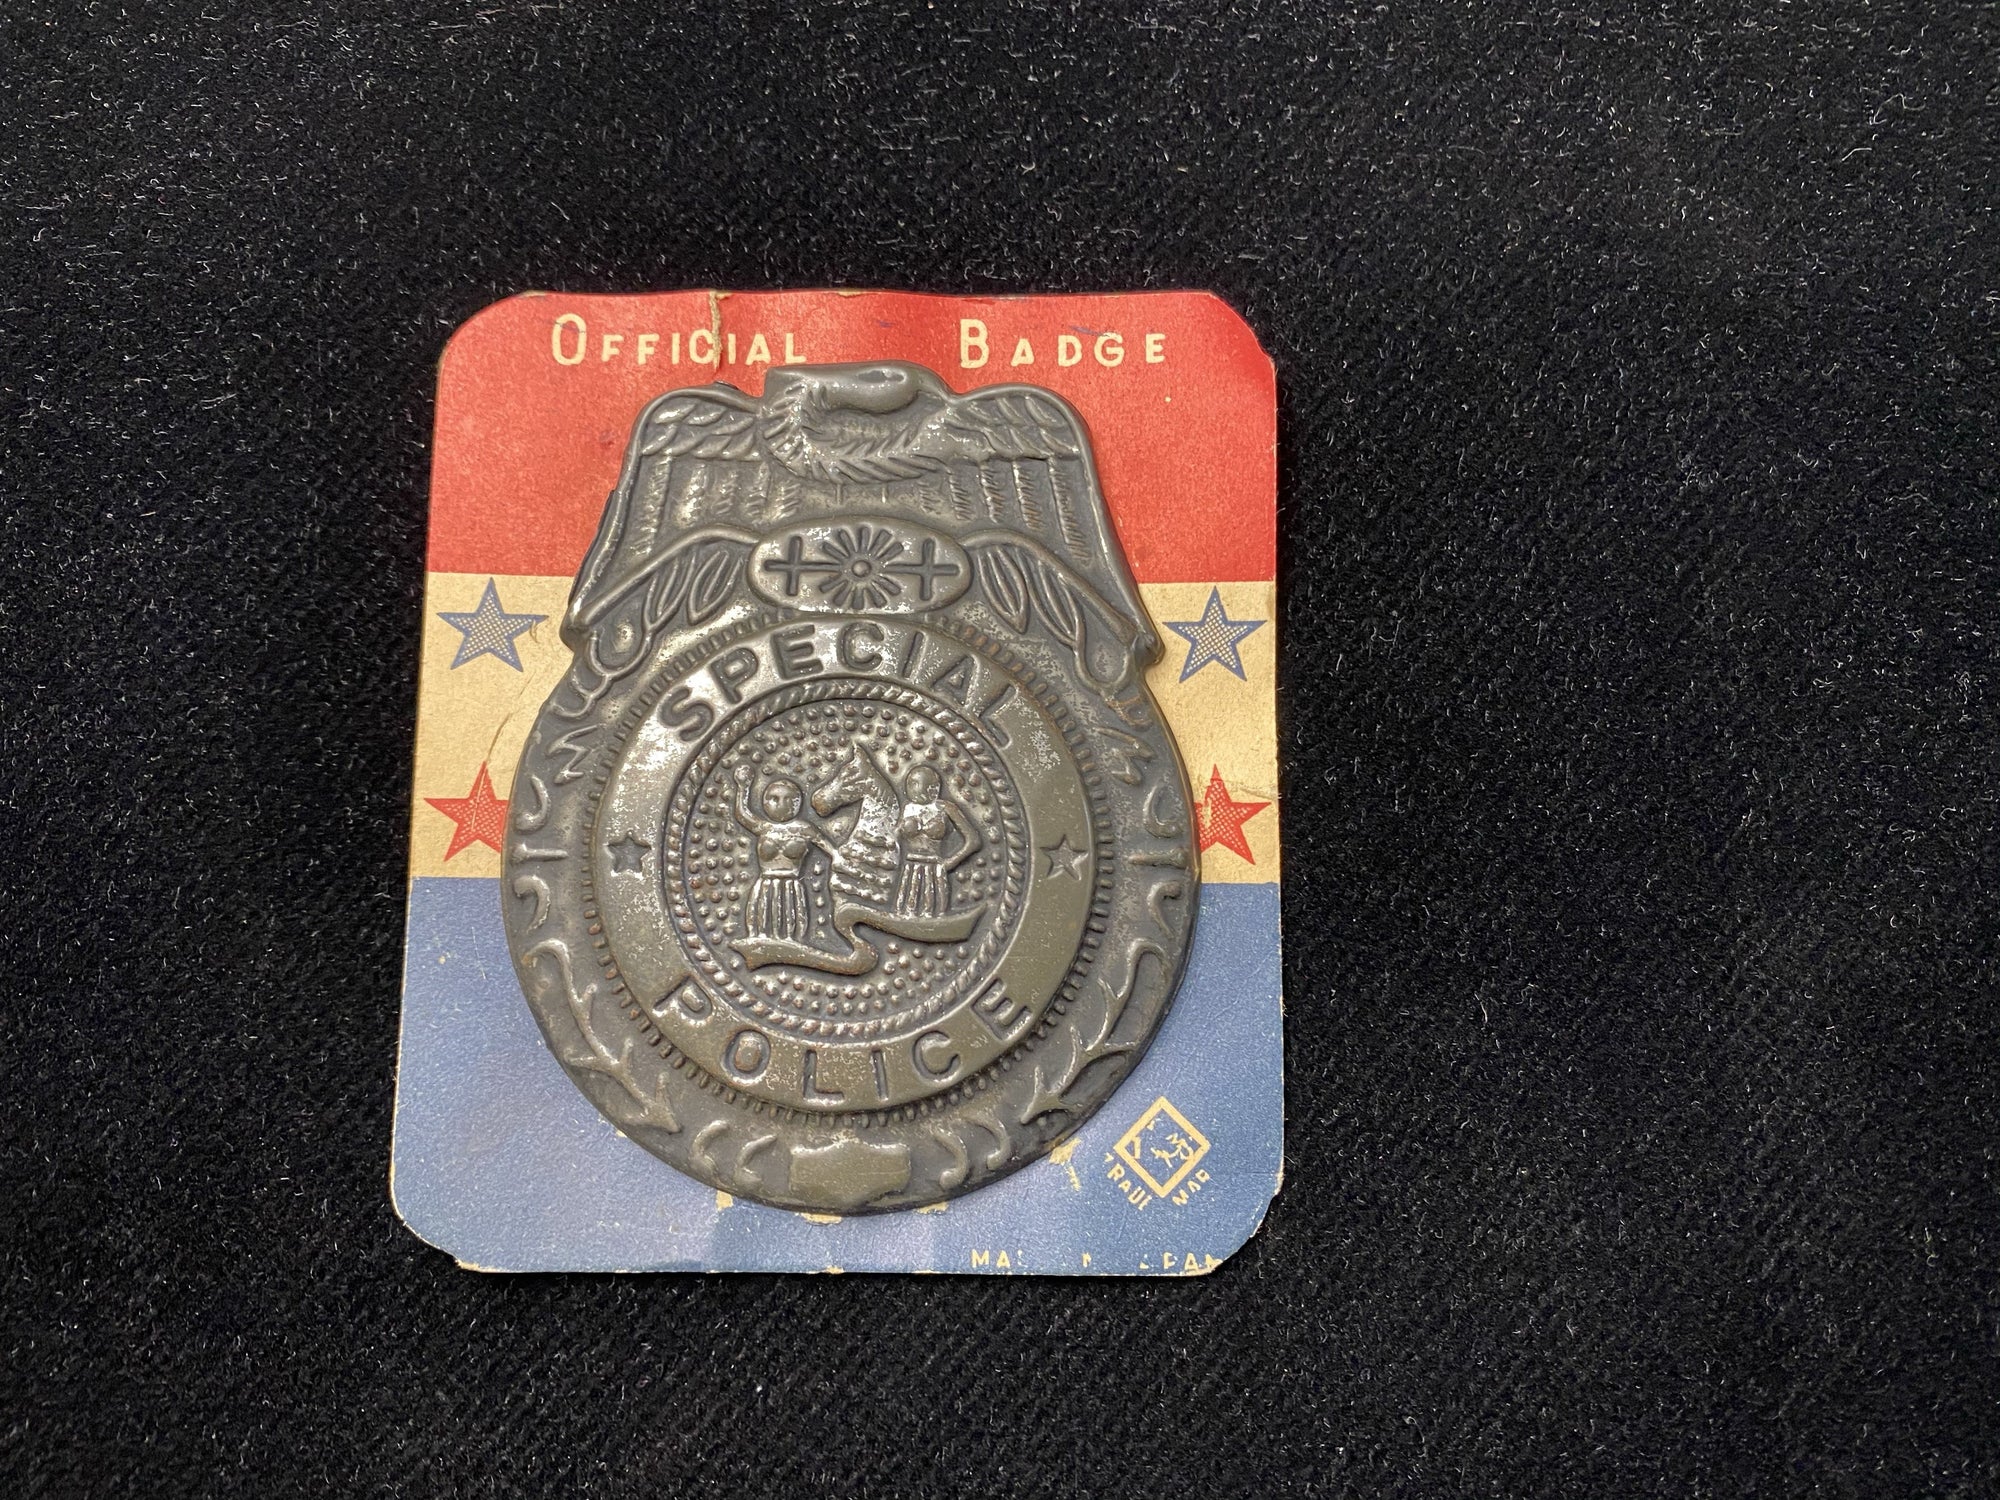 pressed tin novelty kid's police badge is still mounted on its original red white and blue display card. Made in Japan circa 1950